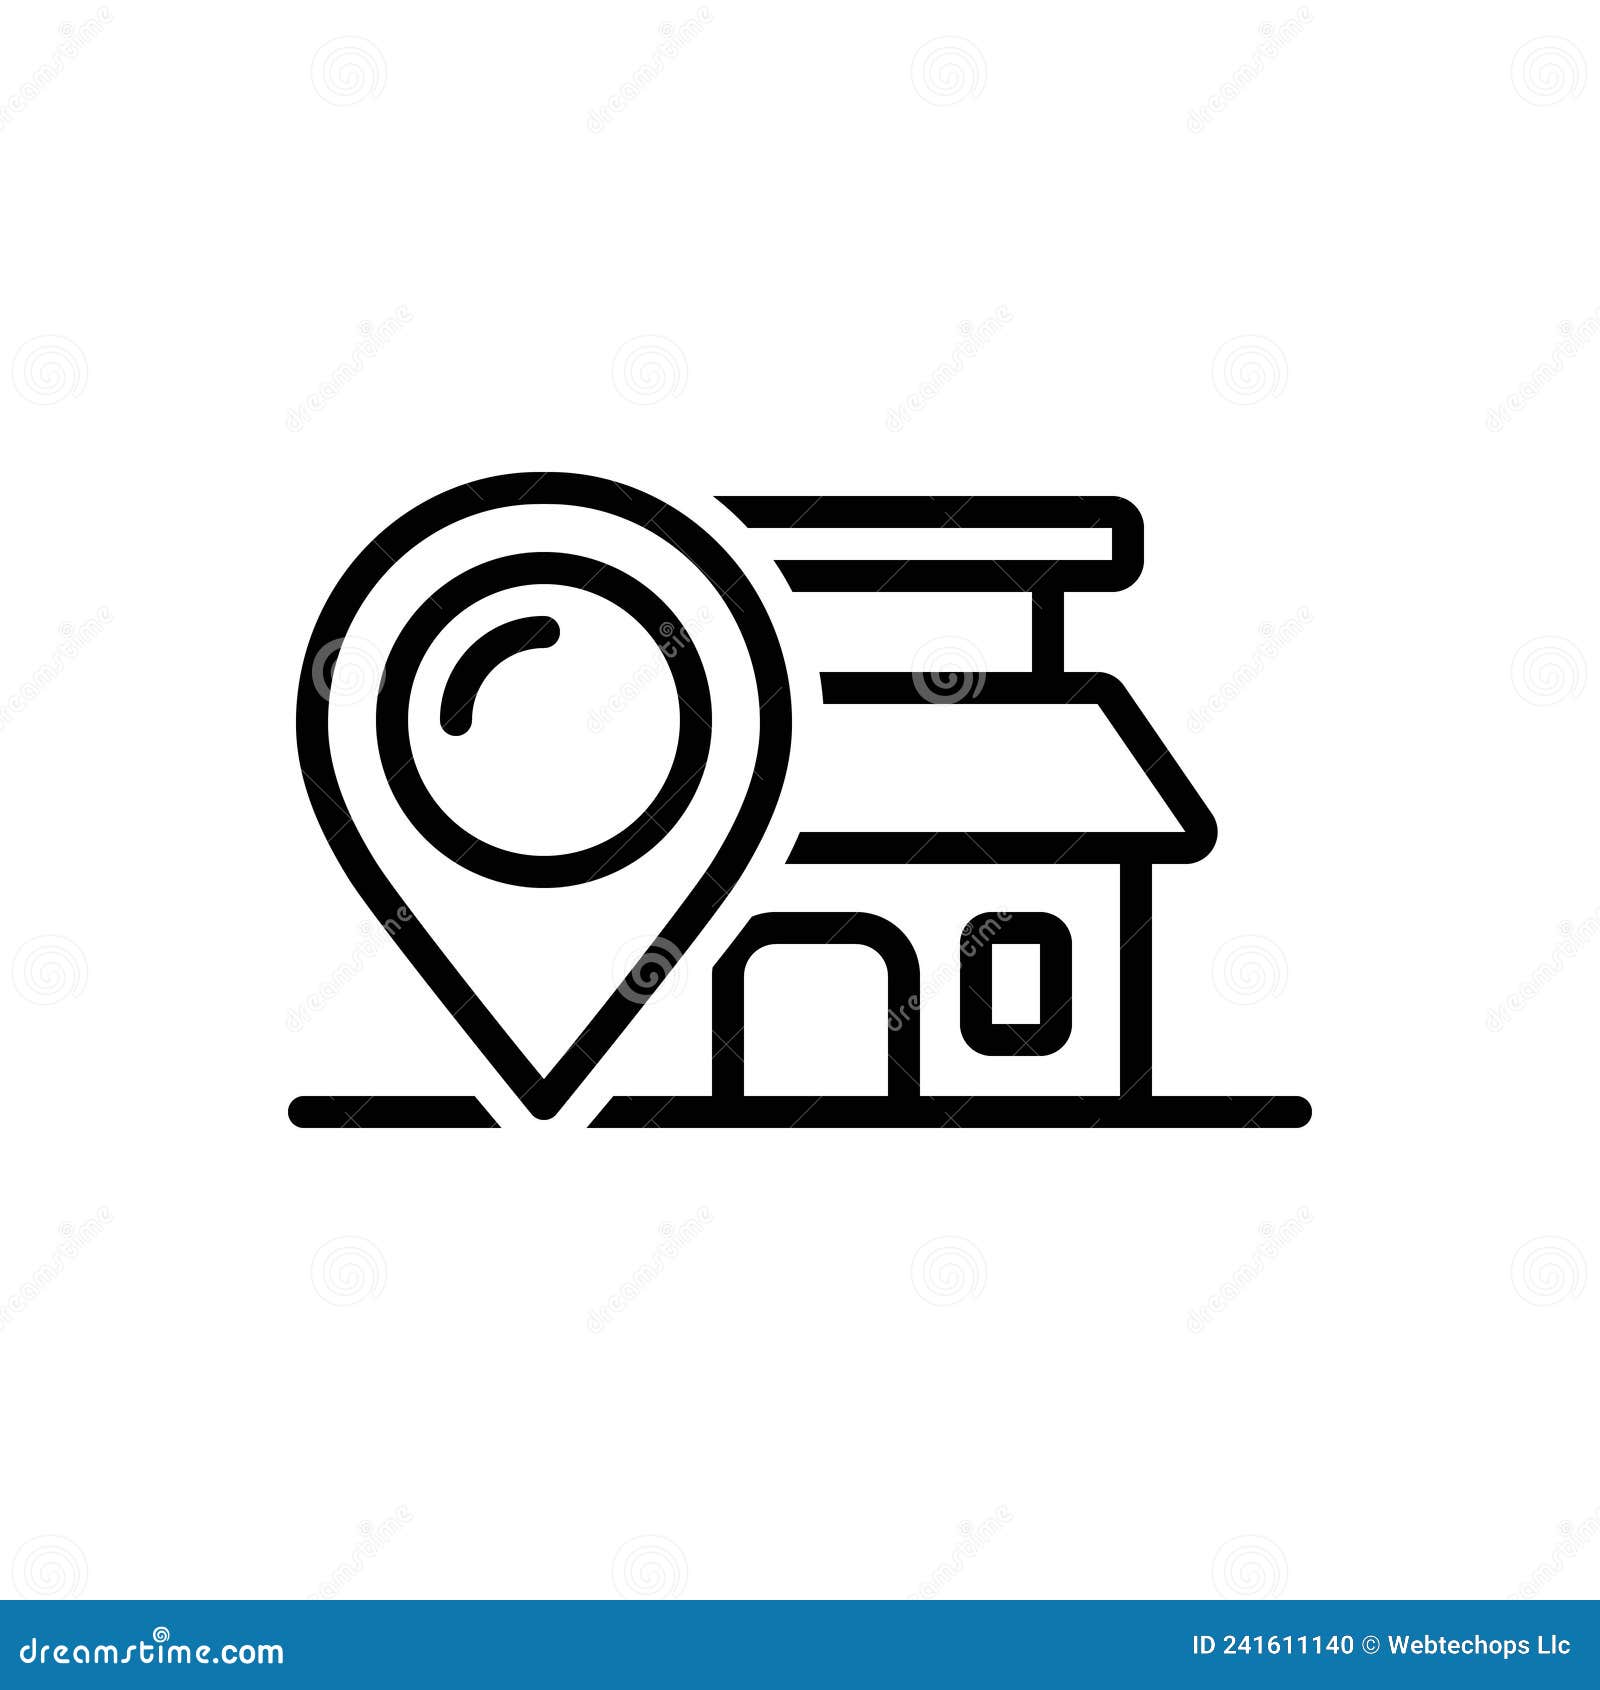 black line icon for locale, place and spot